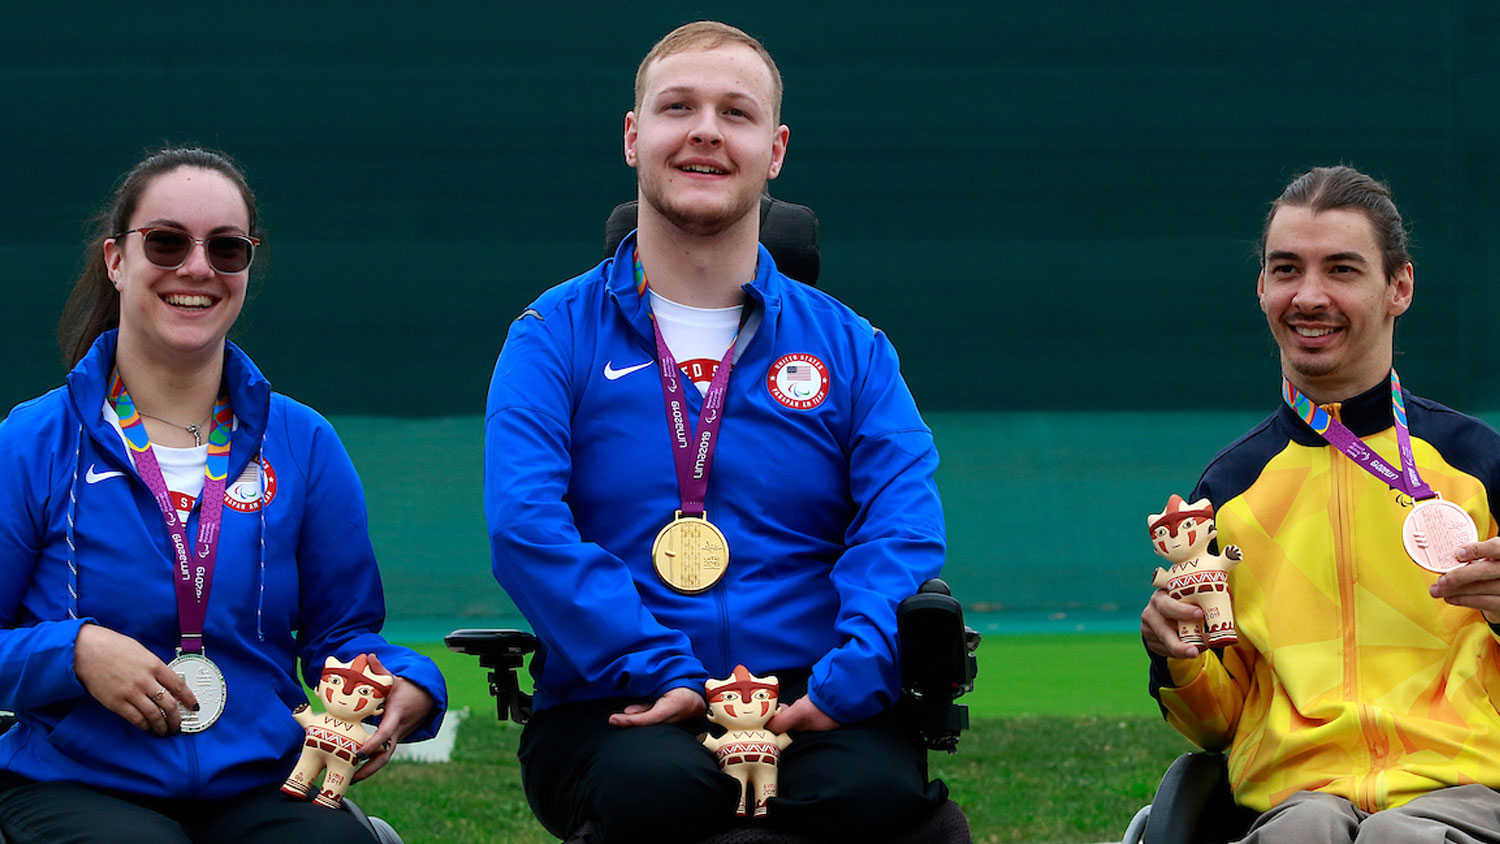 Team USA Secures 9 Medals At Parapan American Games An NRA Shooting